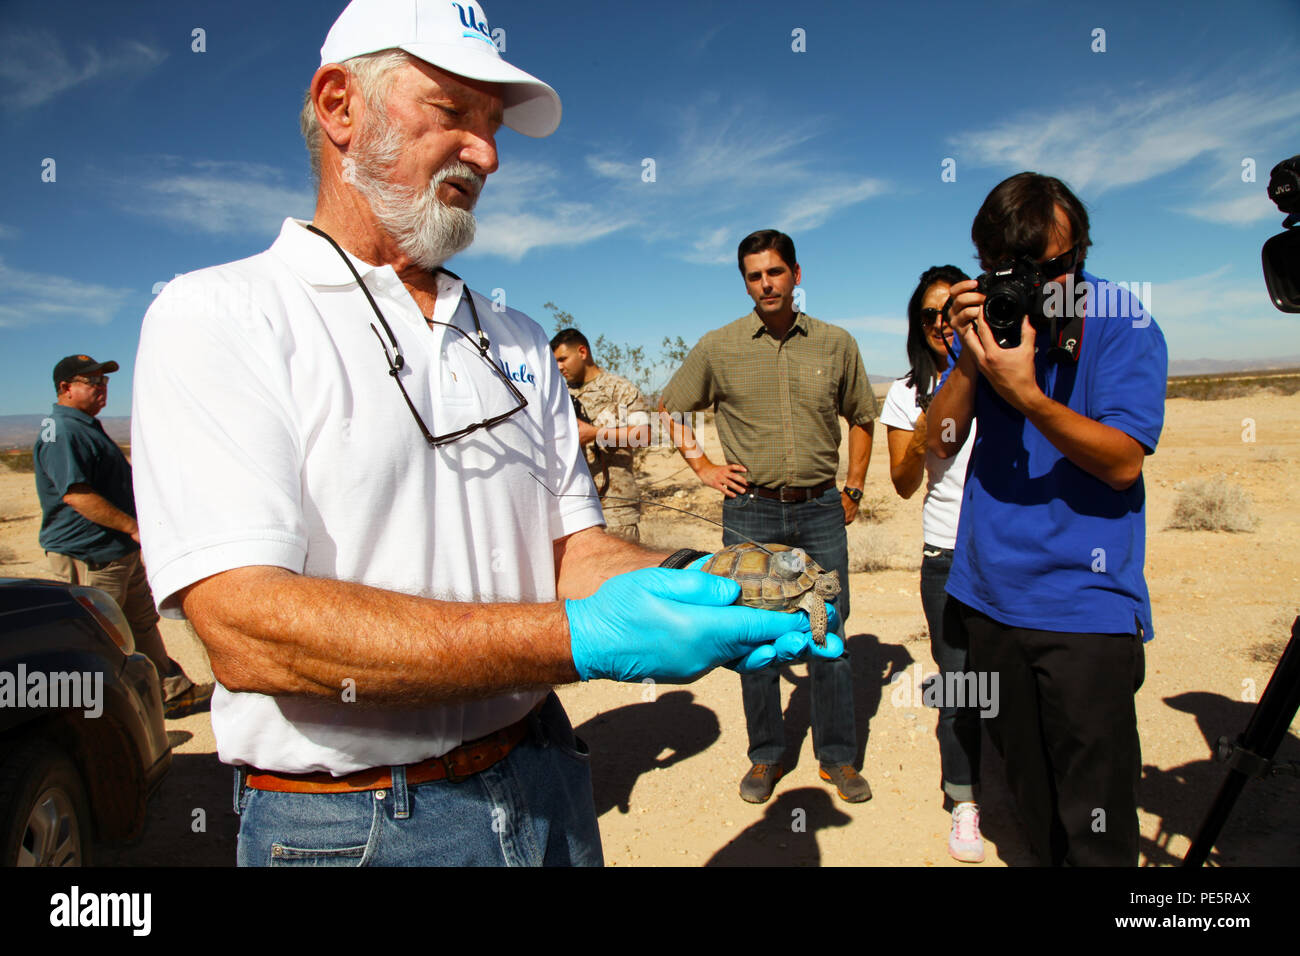 https://c8.alamy.com/comp/PE5RAX/dr-ken-nagy-university-of-california-los-angeles-research-professor-holds-no-2-4-the-tortoise-of-the-hour-sept-30-2015-the-9-year-old-female-is-one-of-the-first-35-desert-tortoises-raised-at-the-combat-centers-tortoise-research-and-captive-rearing-site-to-be-released-into-the-wild-this-year-official-usmc-photo-by-kelly-osullivanreleased-PE5RAX.jpg